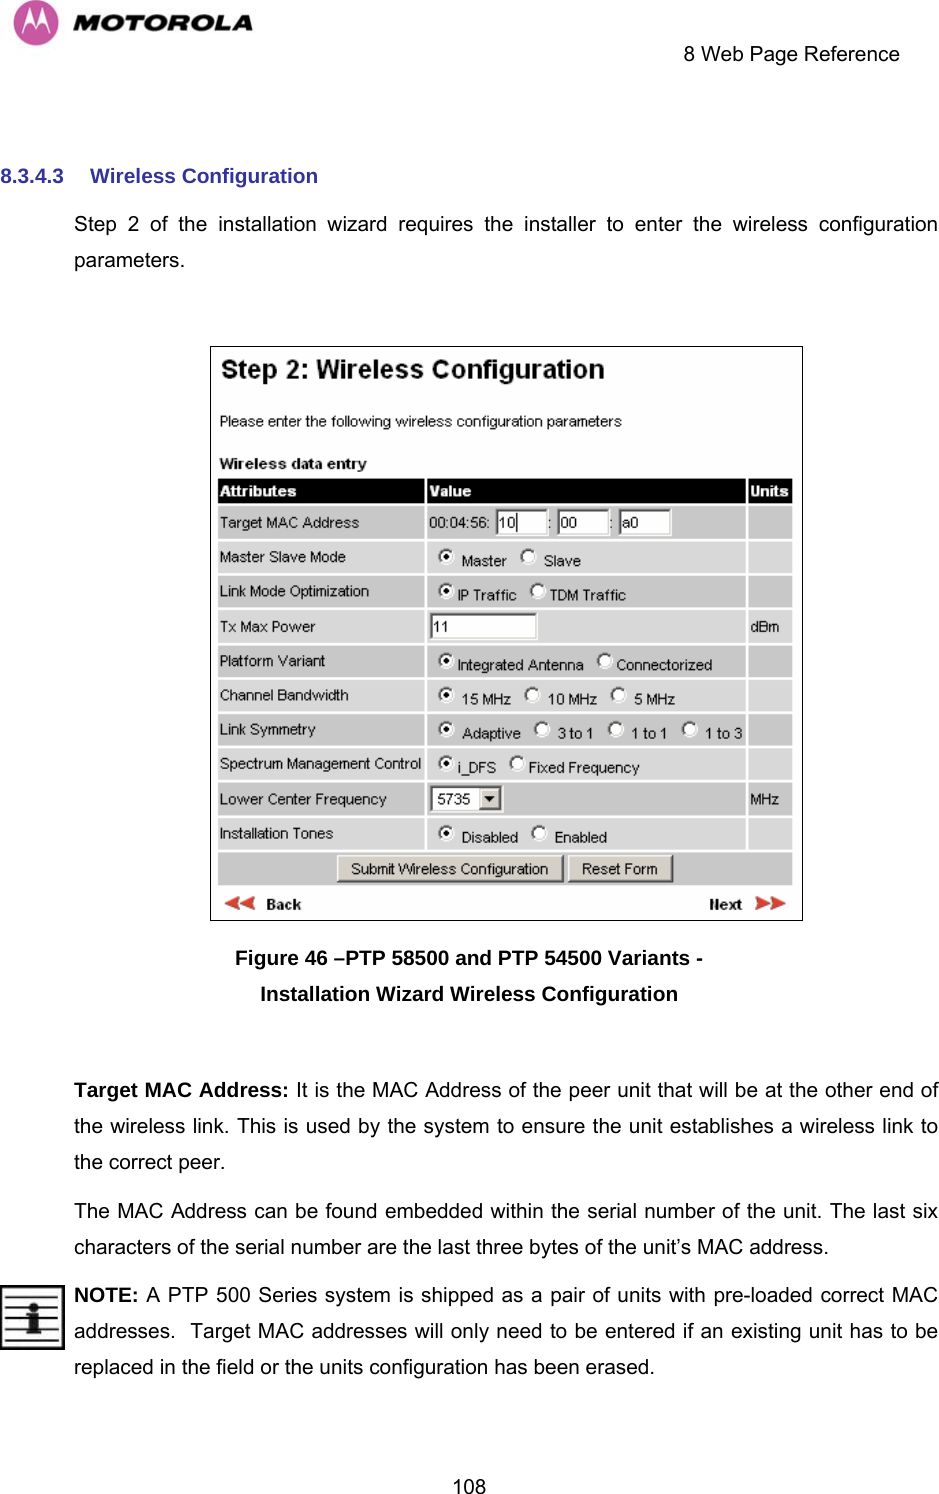     8 Web Page Reference  108 8.3.4.3  Wireless Configuration Step 2 of the installation wizard requires the installer to enter the wireless configuration parameters.   Figure 46 –PTP 58500 and PTP 54500 Variants -  Installation Wizard Wireless Configuration  Target MAC Address: It is the MAC Address of the peer unit that will be at the other end of the wireless link. This is used by the system to ensure the unit establishes a wireless link to the correct peer.  The MAC Address can be found embedded within the serial number of the unit. The last six characters of the serial number are the last three bytes of the unit’s MAC address. NOTE: A PTP 500 Series system is shipped as a pair of units with pre-loaded correct MAC addresses.  Target MAC addresses will only need to be entered if an existing unit has to be replaced in the field or the units configuration has been erased. 